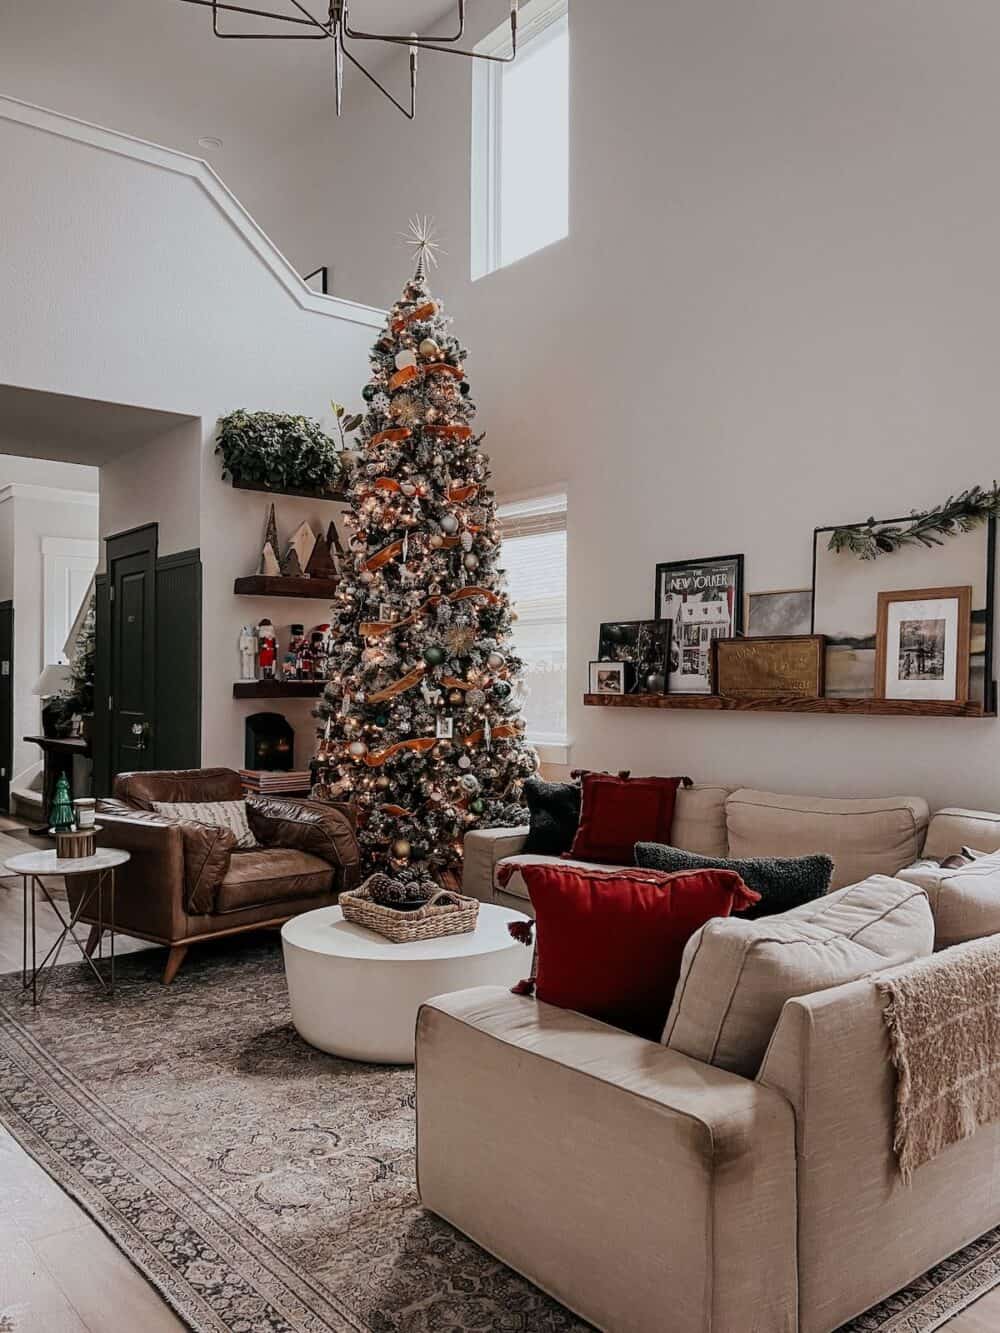 Cozy living room decorated for Christmas